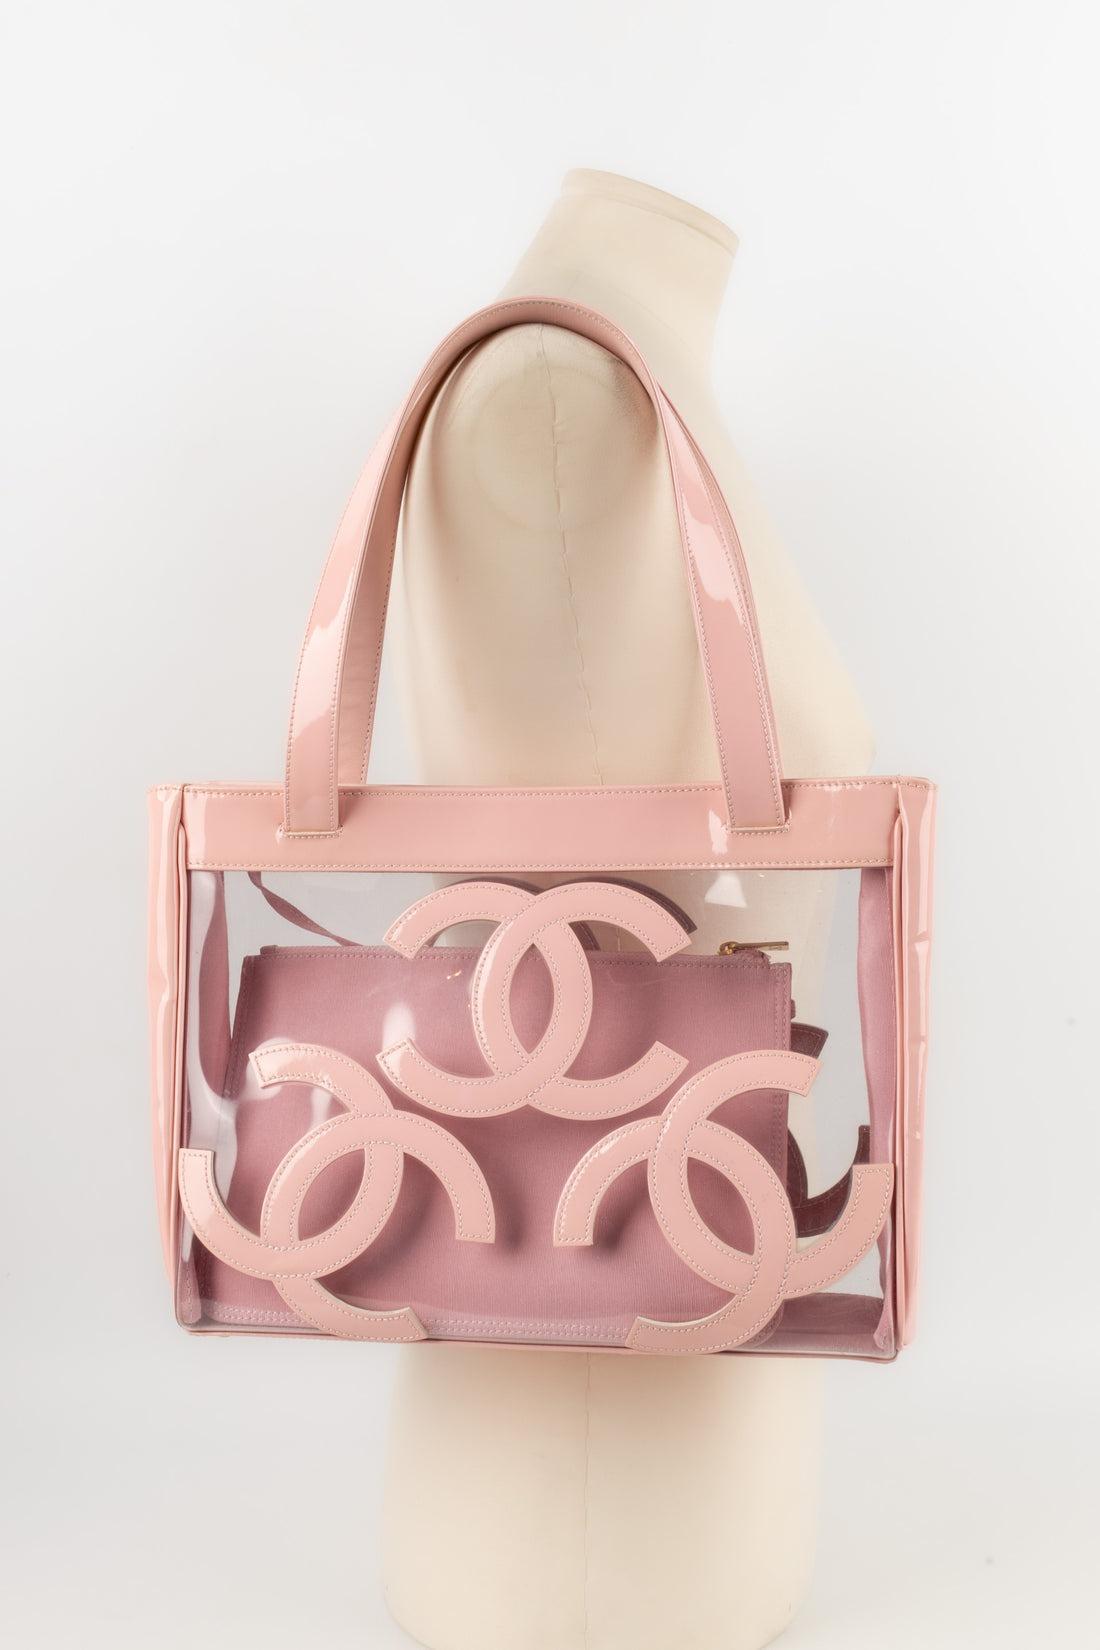 Chanel Pink Bag in Transparent Pvc Fabric and Patent Leather, 2004/2005 In Excellent Condition For Sale In SAINT-OUEN-SUR-SEINE, FR